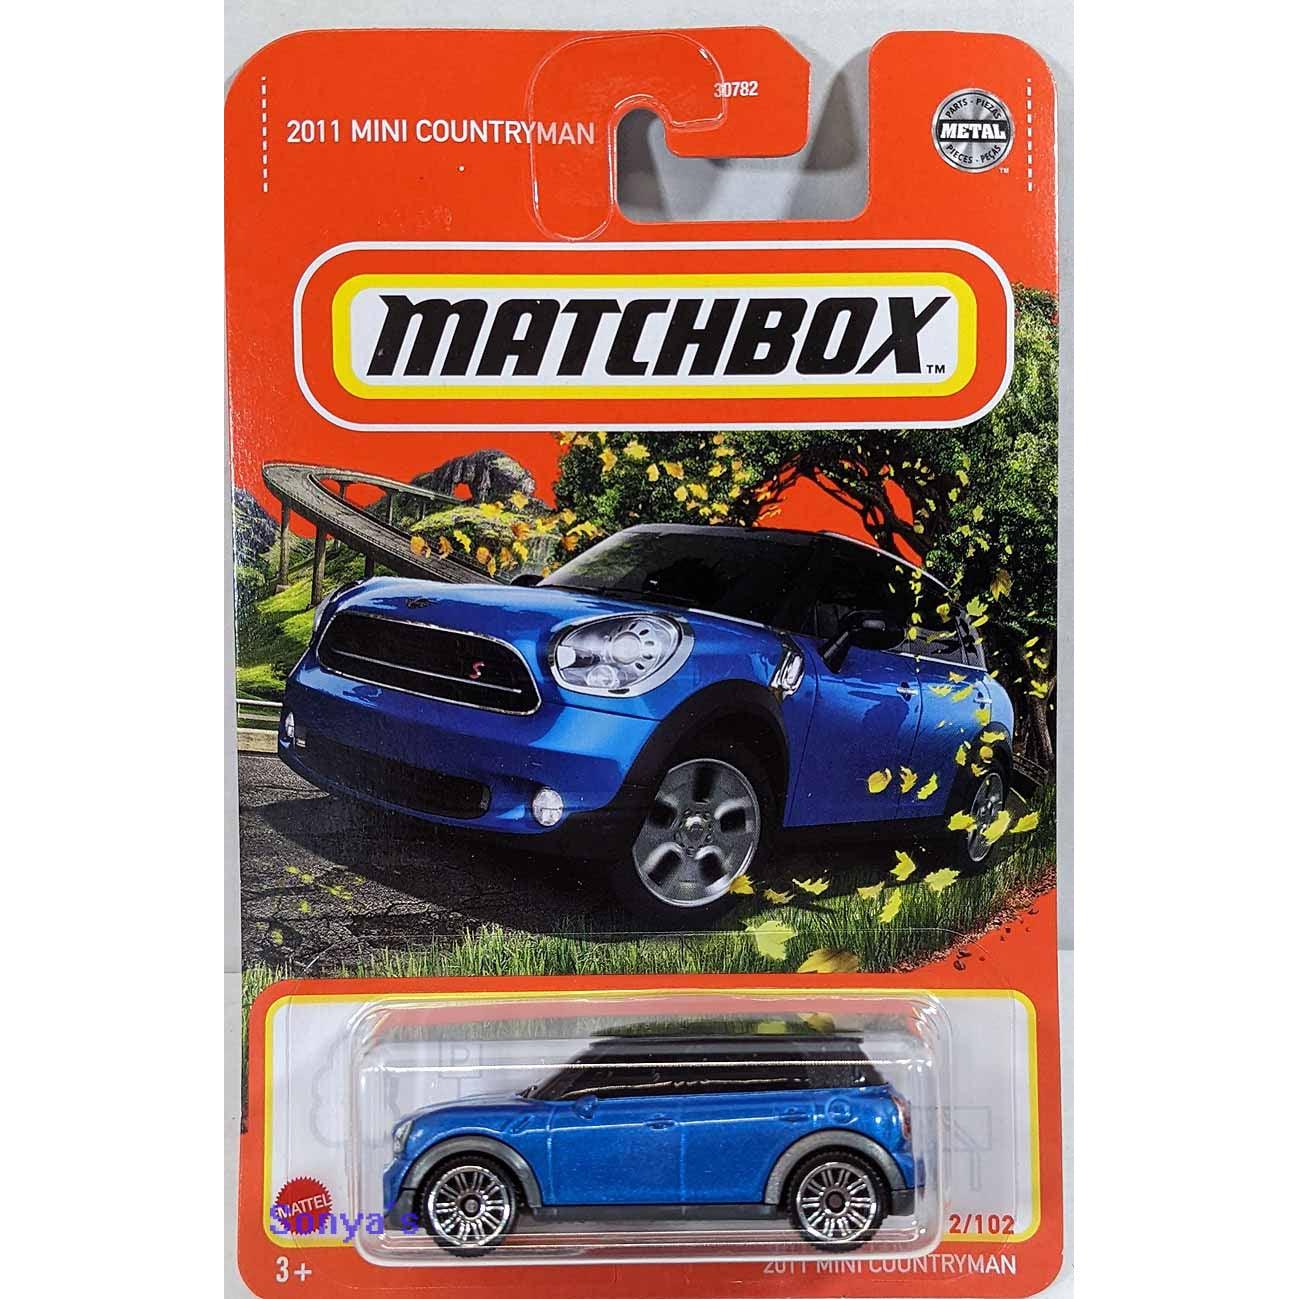 MatchBox Die Cast 1:64 Scale Vehicle - 2011 Mini CountryMan (Blue) - BumbleToys - 2-4 Years, 5-7 Years, Boys, Collectible Vehicles, MatchBox